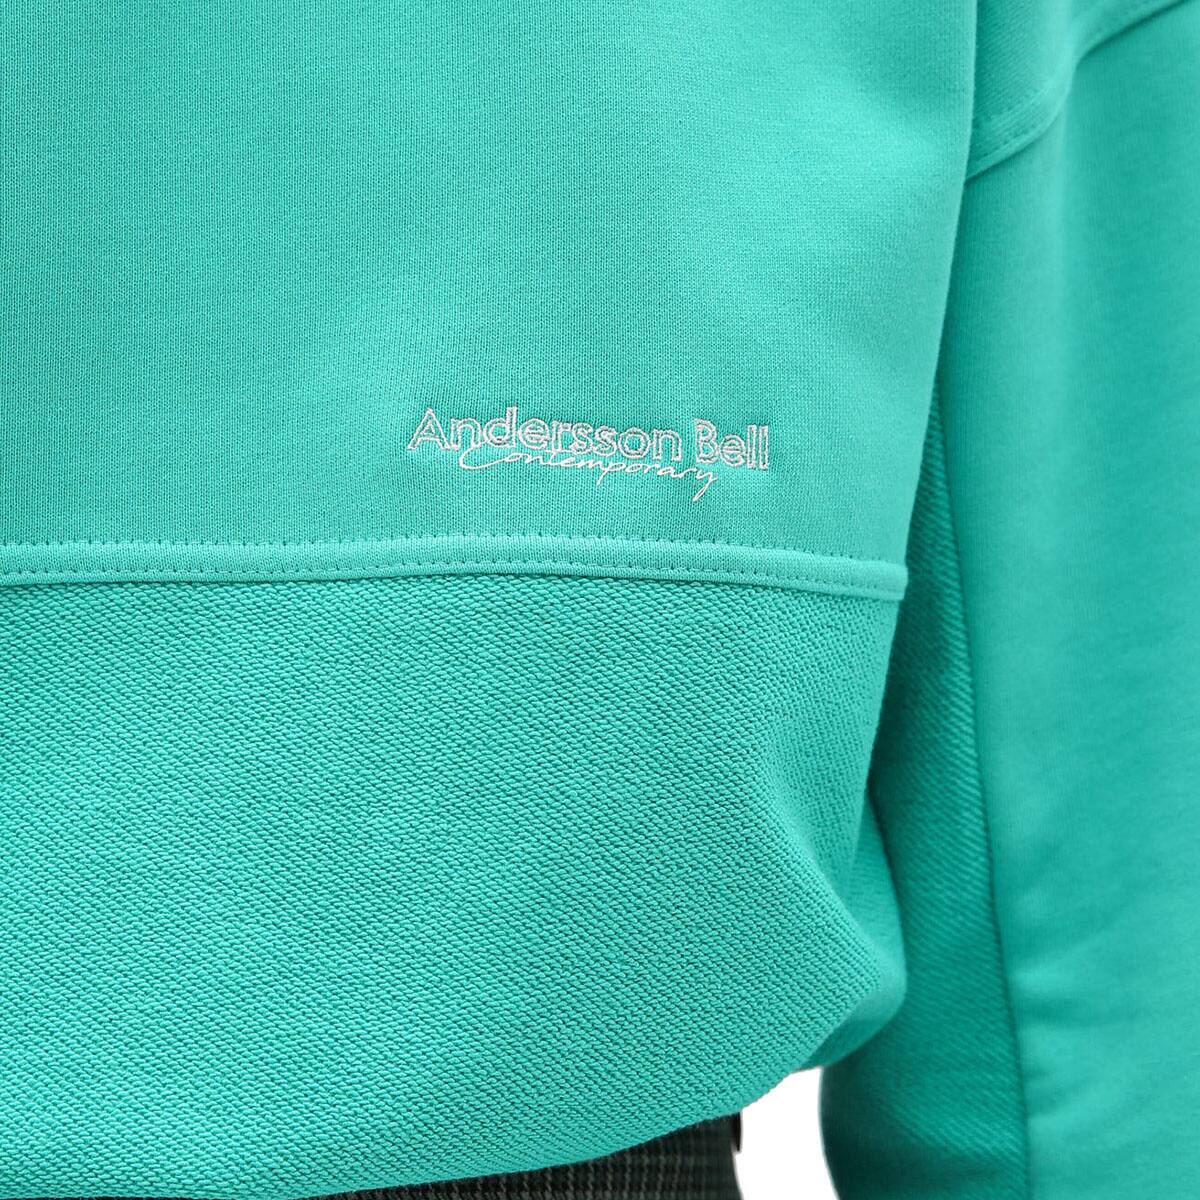 Andersson Bell UNISEX atmos SWEAT SHIRTS